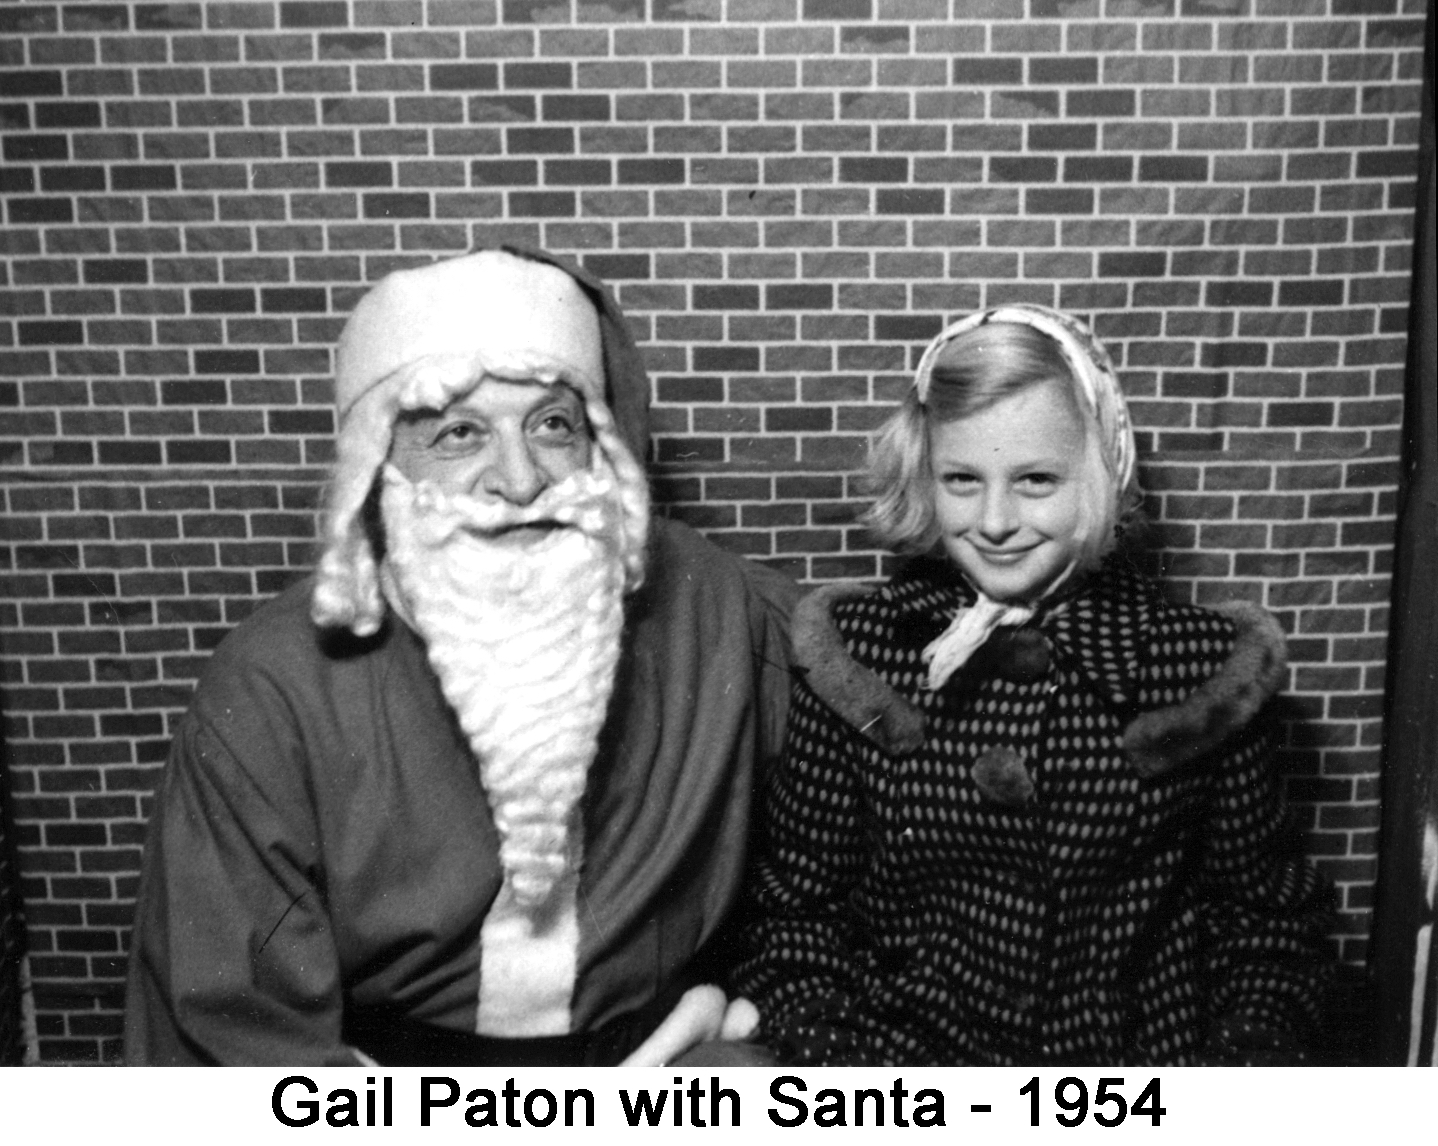 A Santa worker and Gail Paton sitting in front of a brick wall